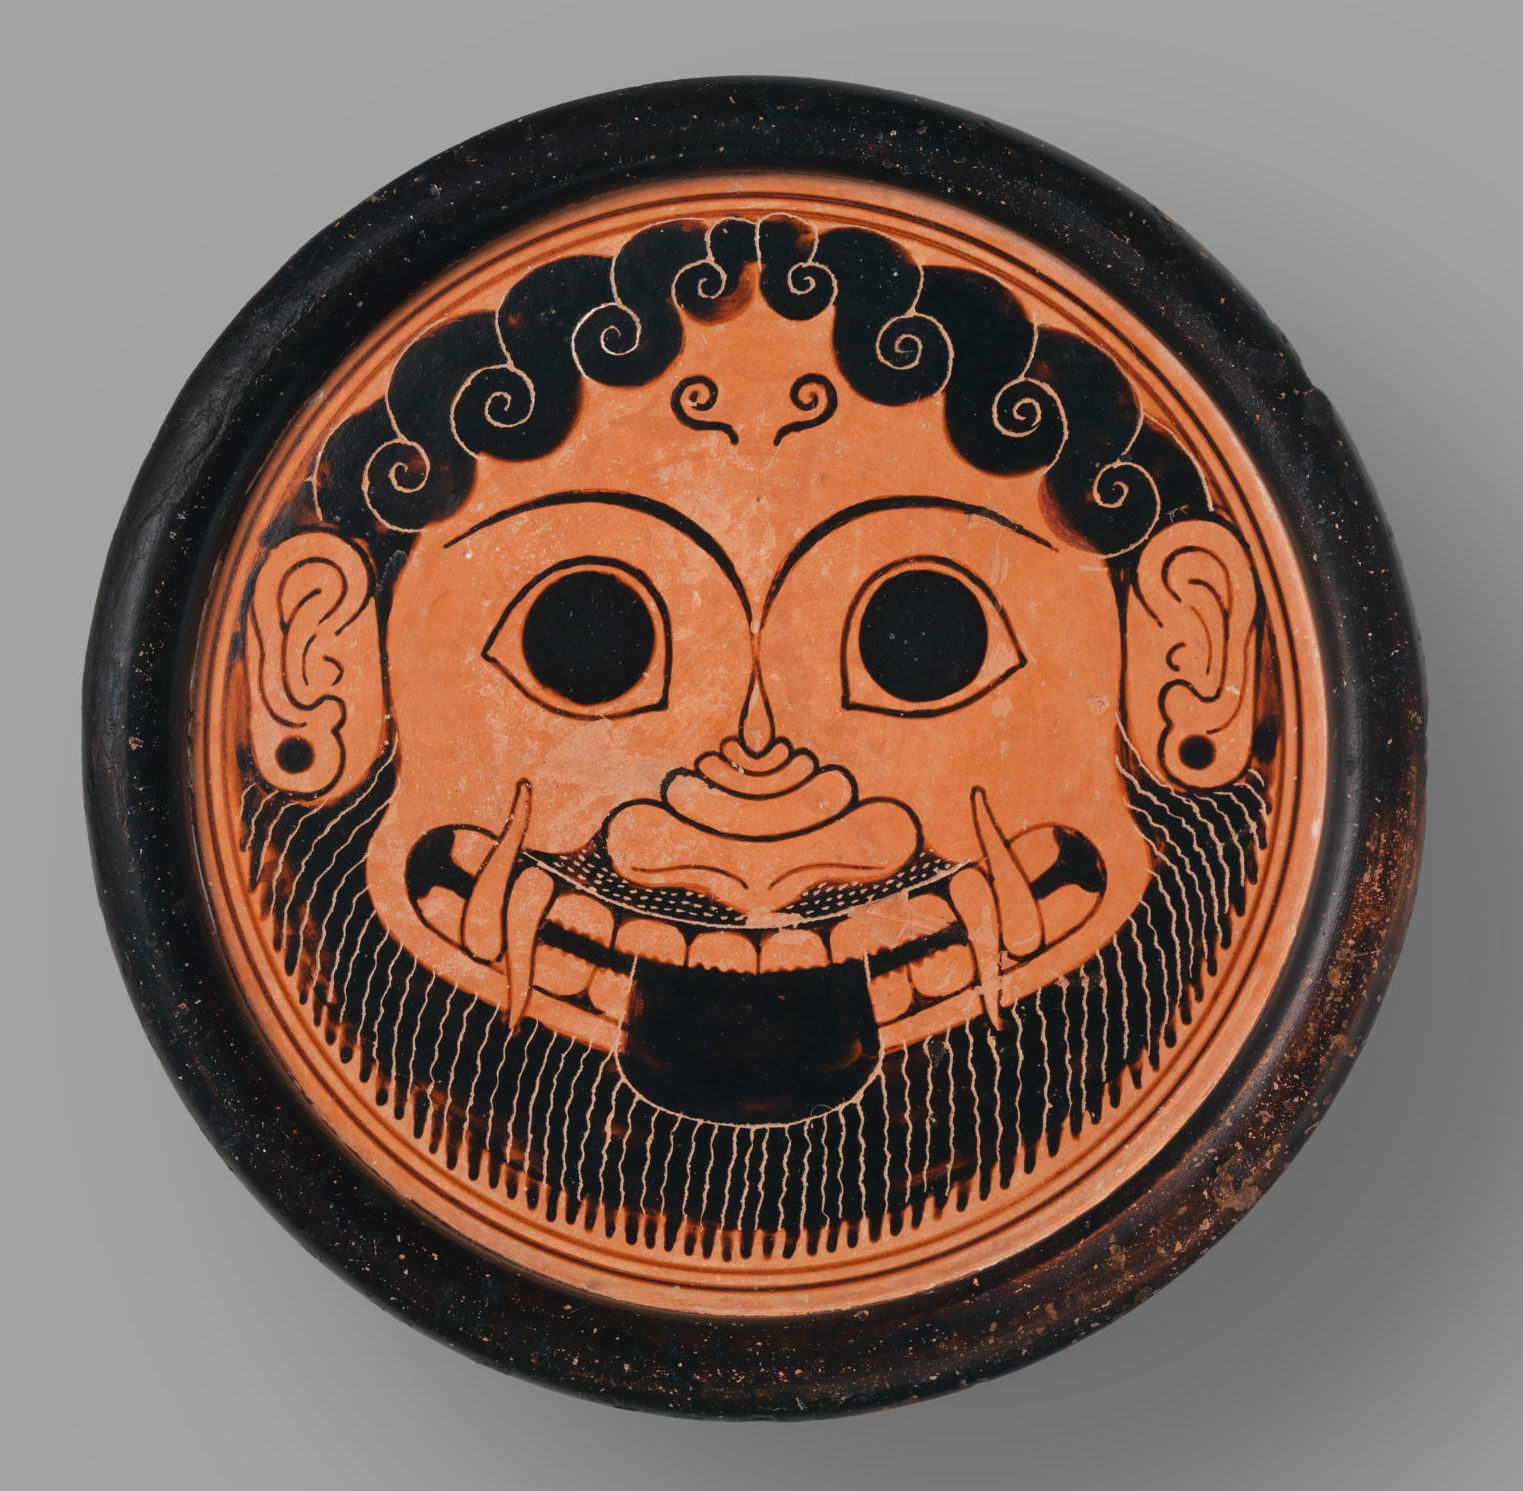 Head of a broad-faced grinning woman. Her smile reveals tusks and her tongue sticks out. She has curly hair and a beard, and wears earrings..